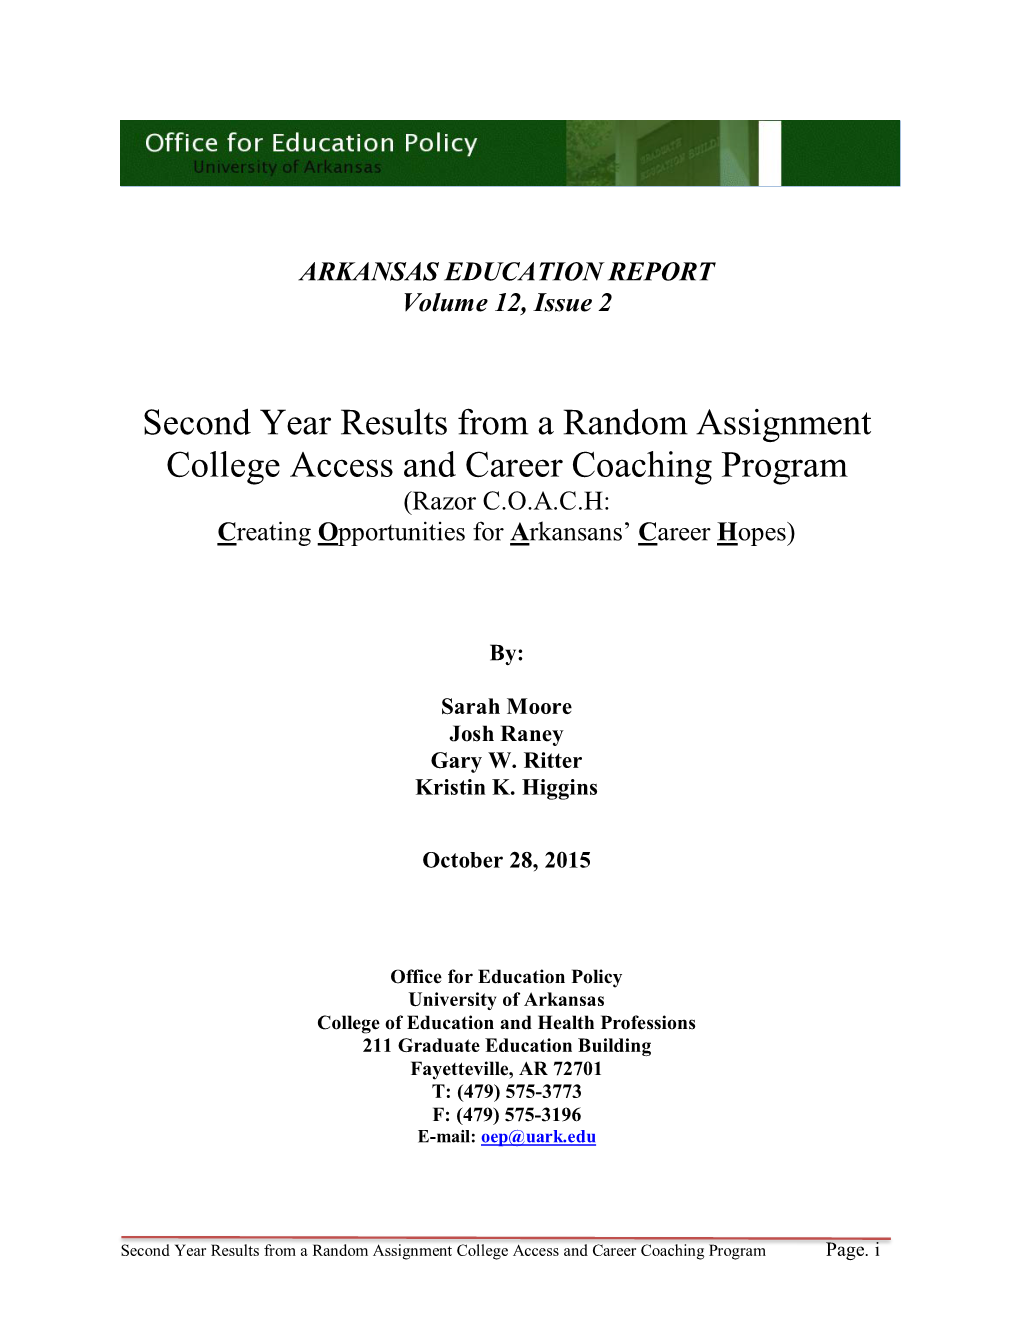 Second Year Results from a Random Assignment College Access and Career Coaching Program (Razor C.O.A.C.H: Creating Opportunities for Arkansans’ Career Hopes)